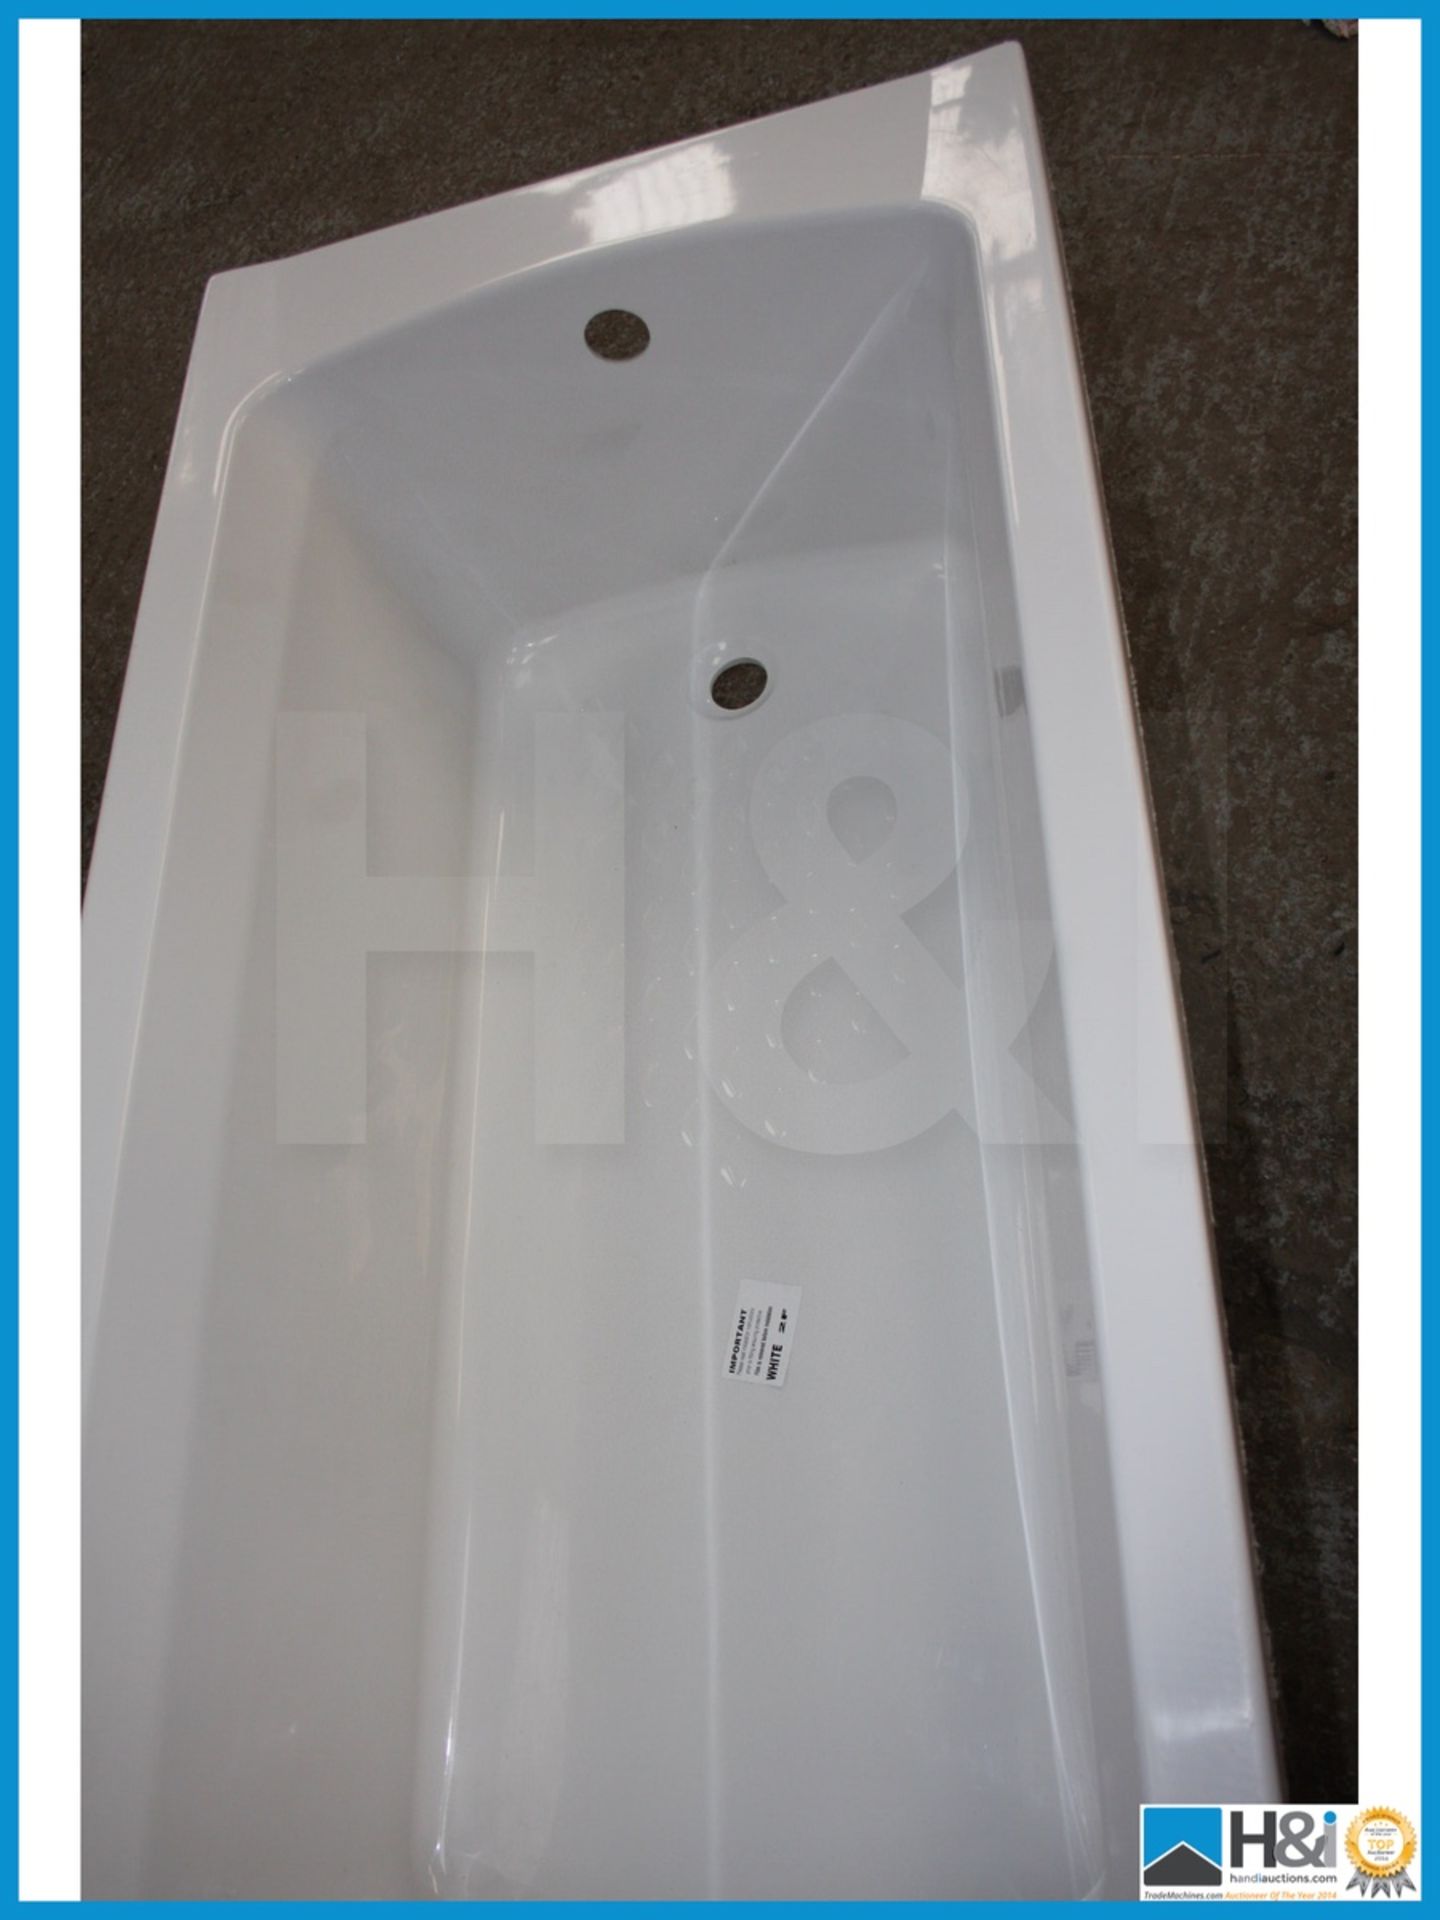 Jacuzzi elatus 1685 x 685 2 tap hole chrome grips new boxed rrp œ899 Appraisal: Viewing Essential - Image 5 of 5